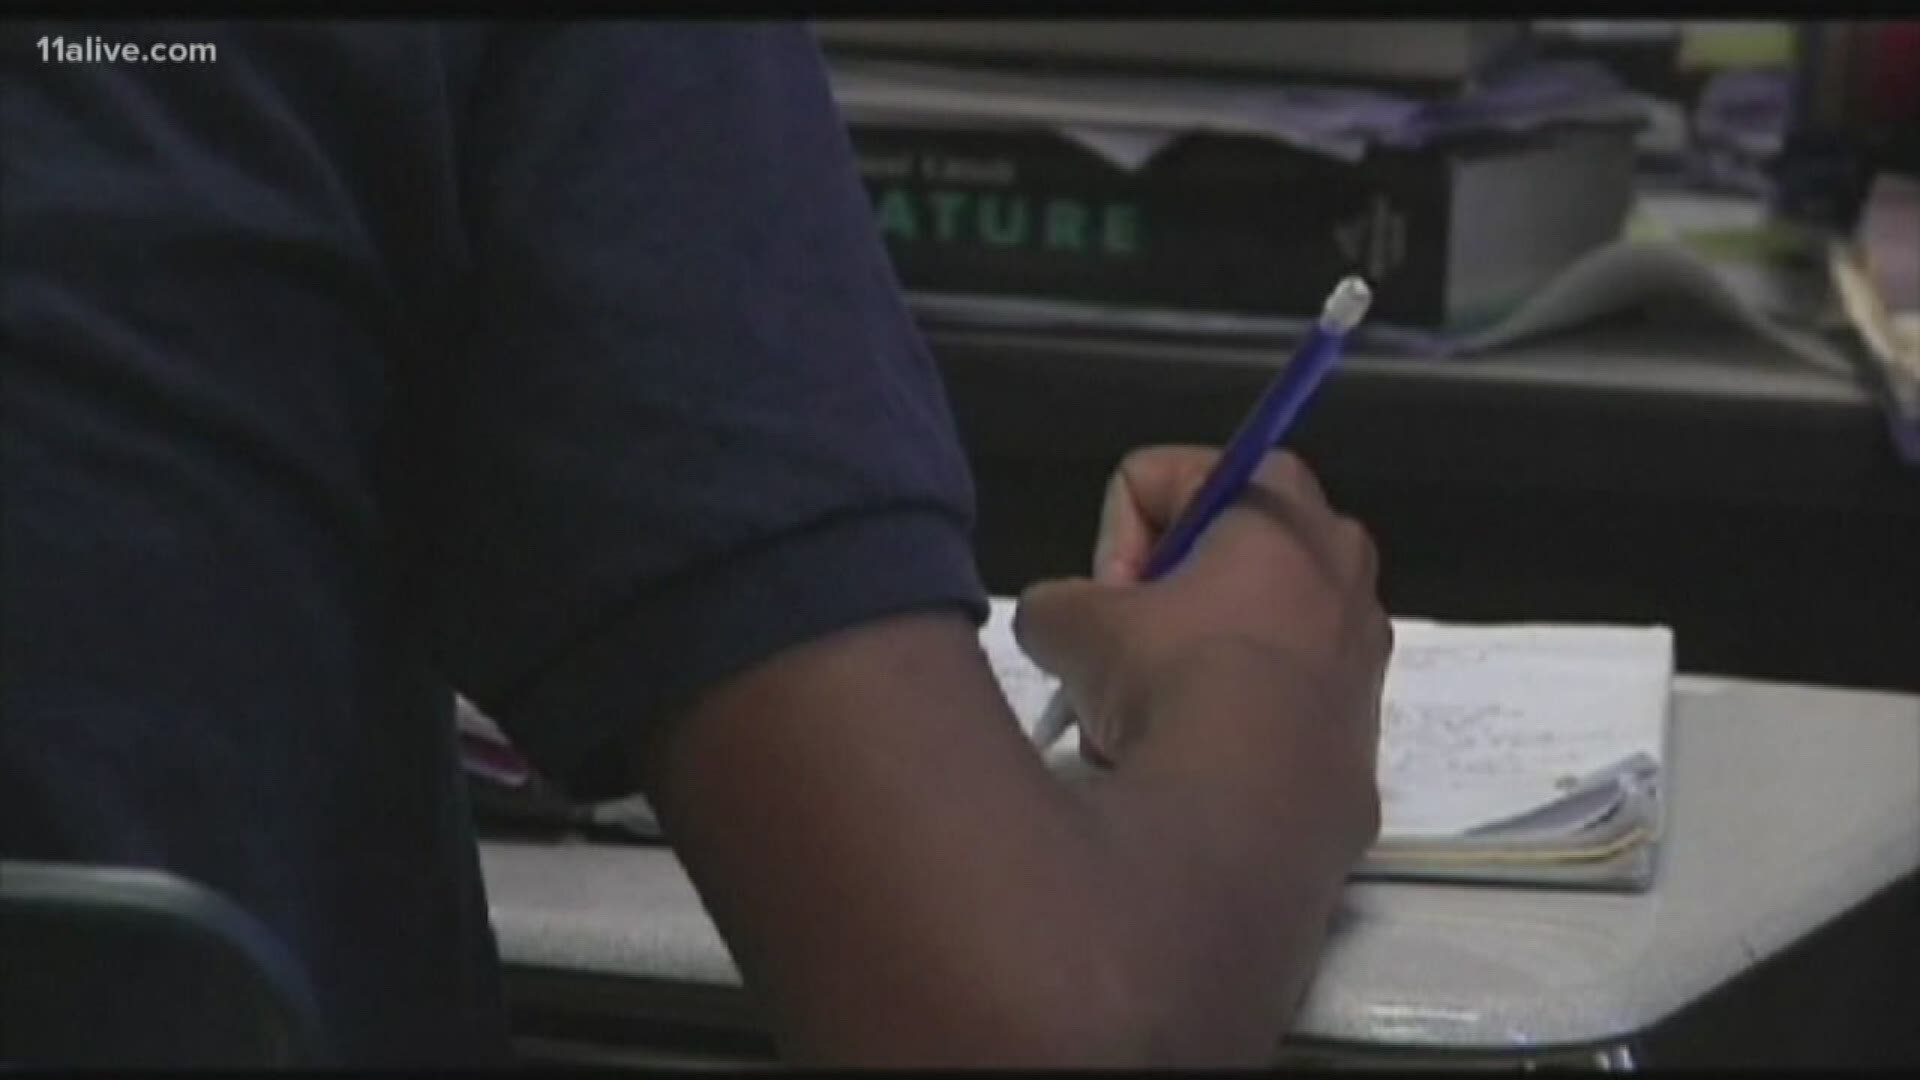 The school system said this glitch will not negatively impact students in anyway.